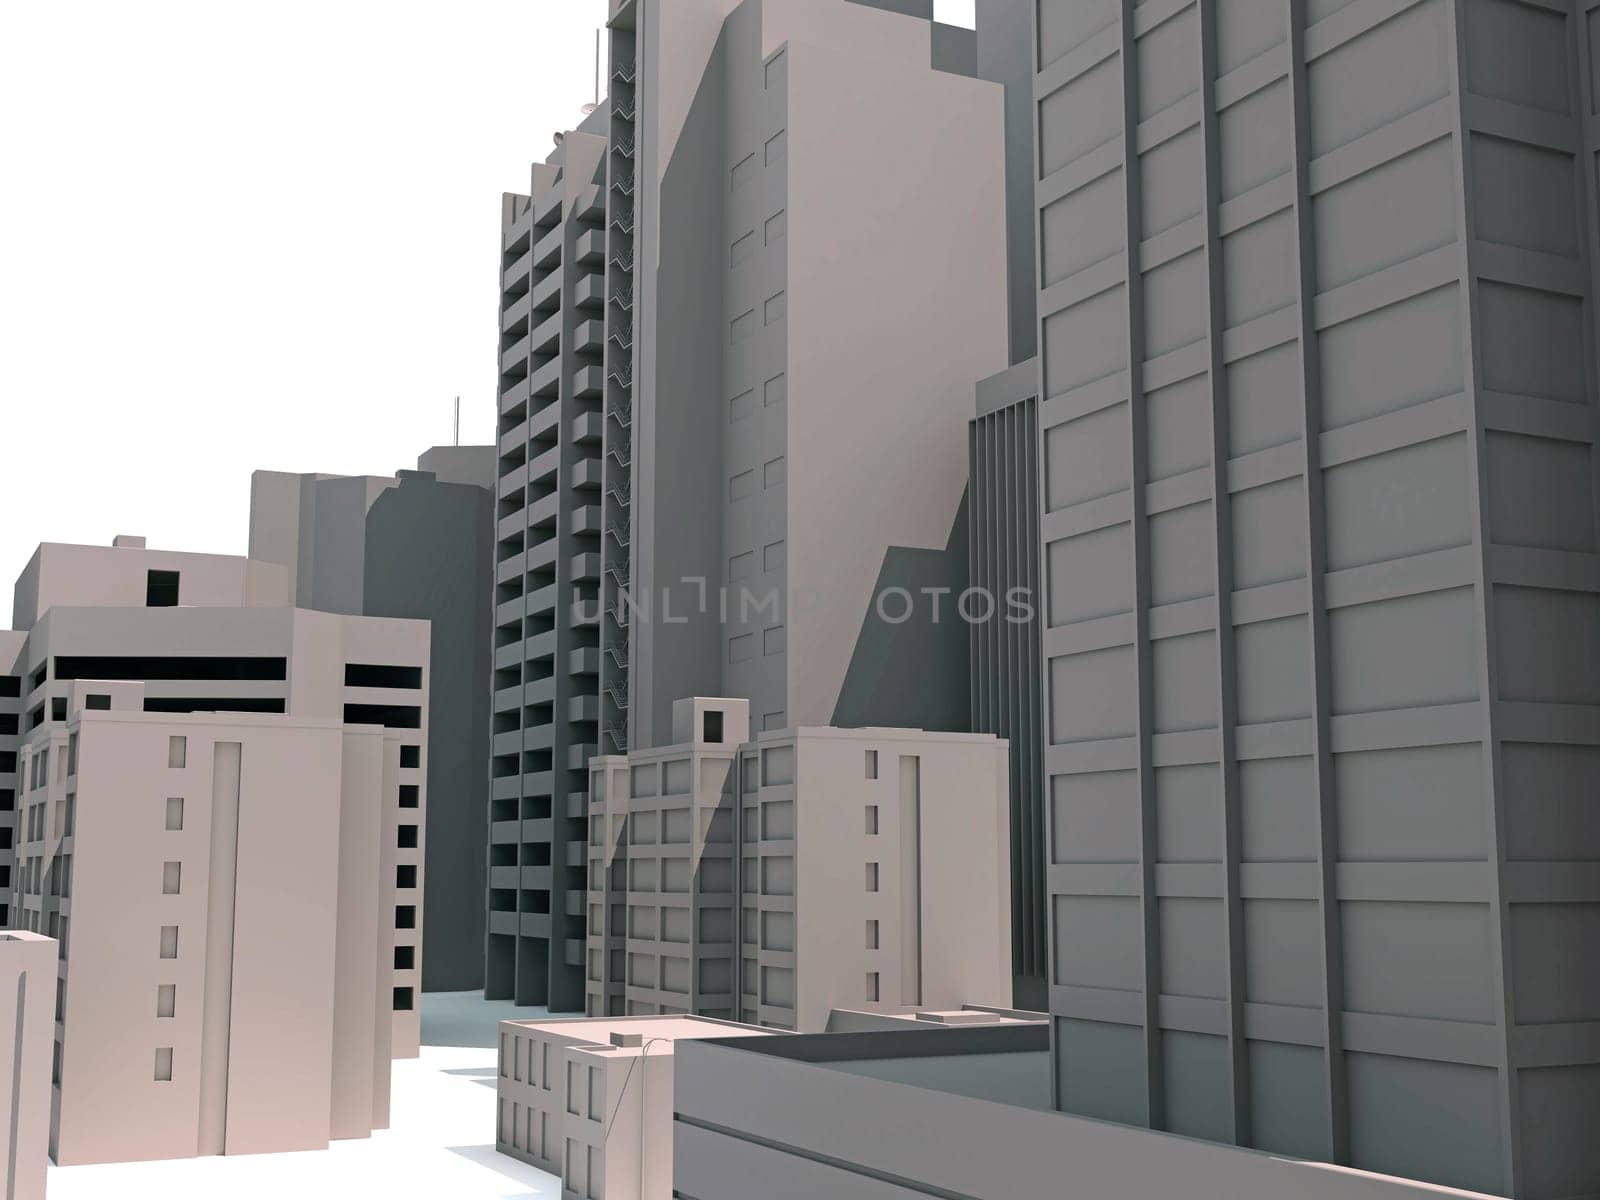 City Buildings 3D rendering on white background by 3DHorse